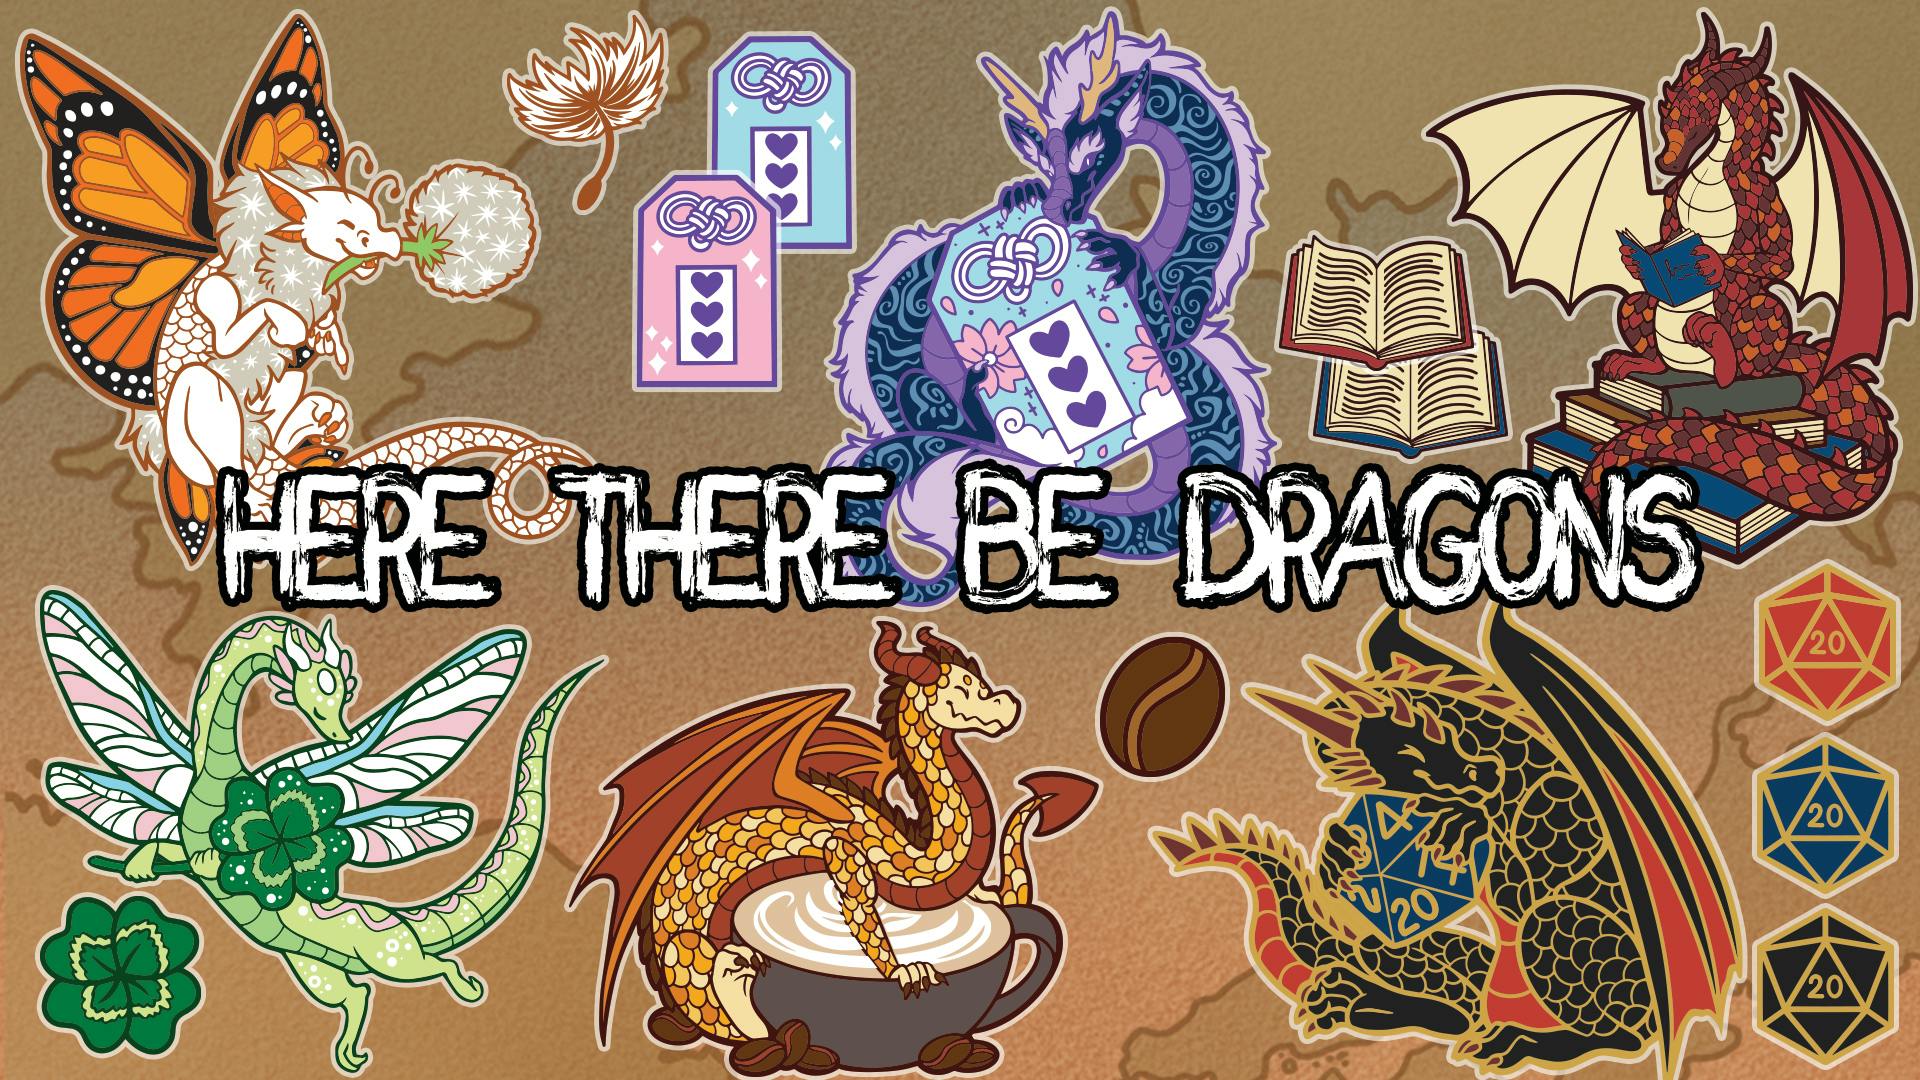 Here There Be Dragons - Tiny Hoarders!